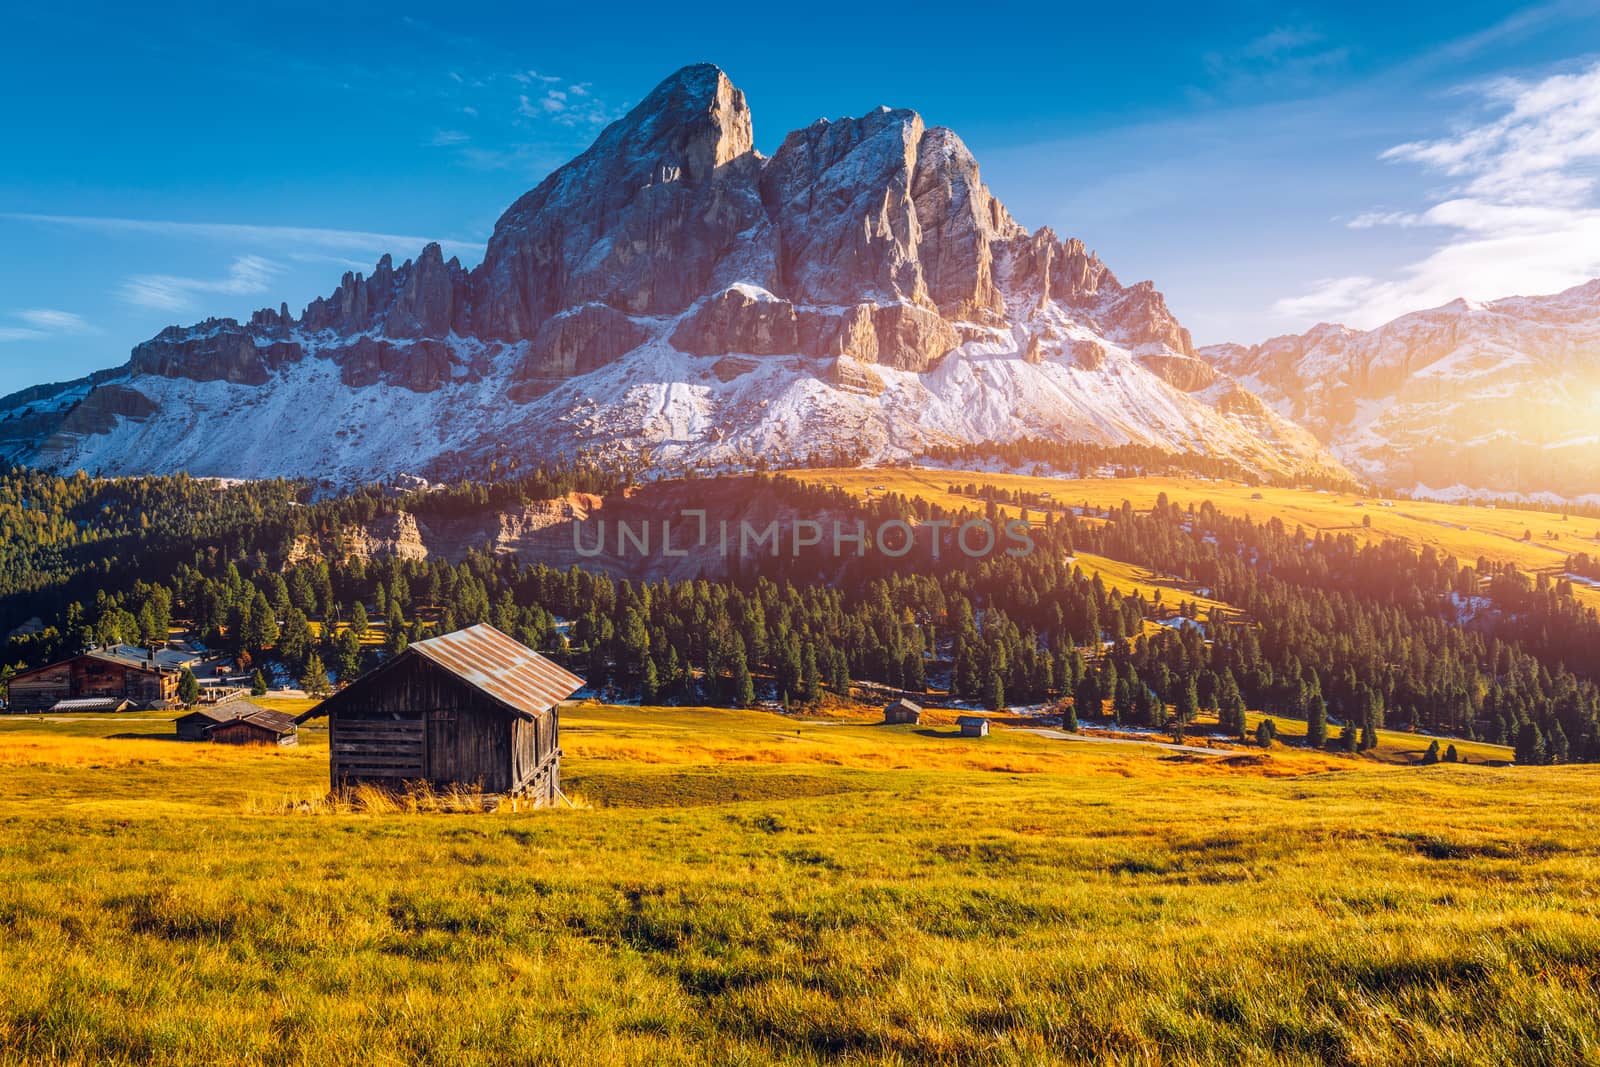 Stunning view of Peitlerkofel mountain from Passo delle Erbe in Dolomites, Italy. View of Sass de Putia (Peitlerkofel) at Passo delle Erbe, with wooden farm houses, Dolomites, South Tyrol, Italy.